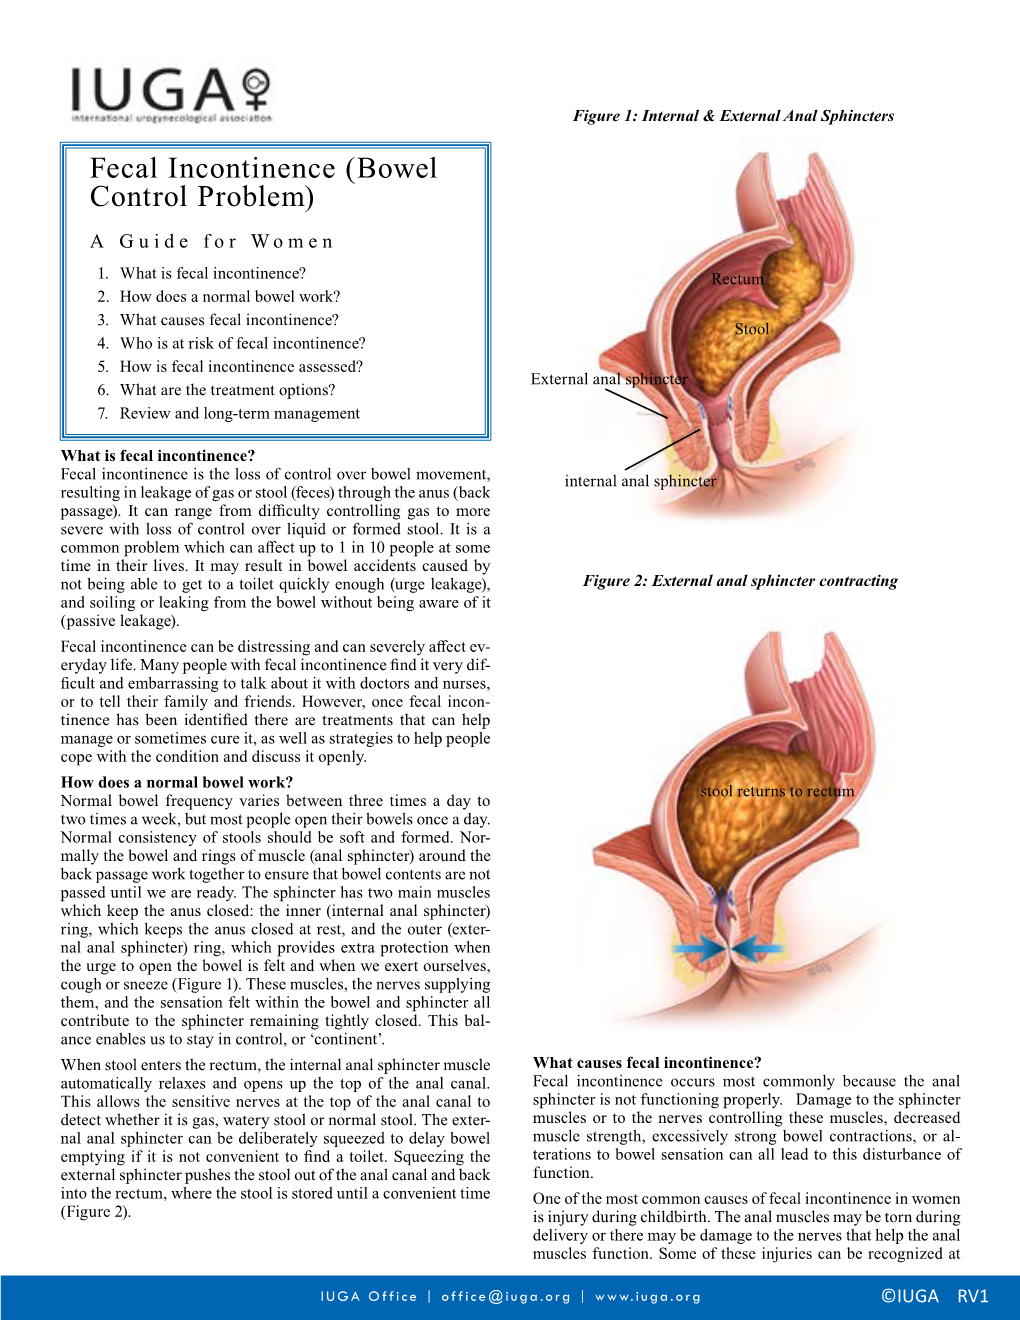 Fecal Incontinence (Bowel Control Problem) a Guide for Women